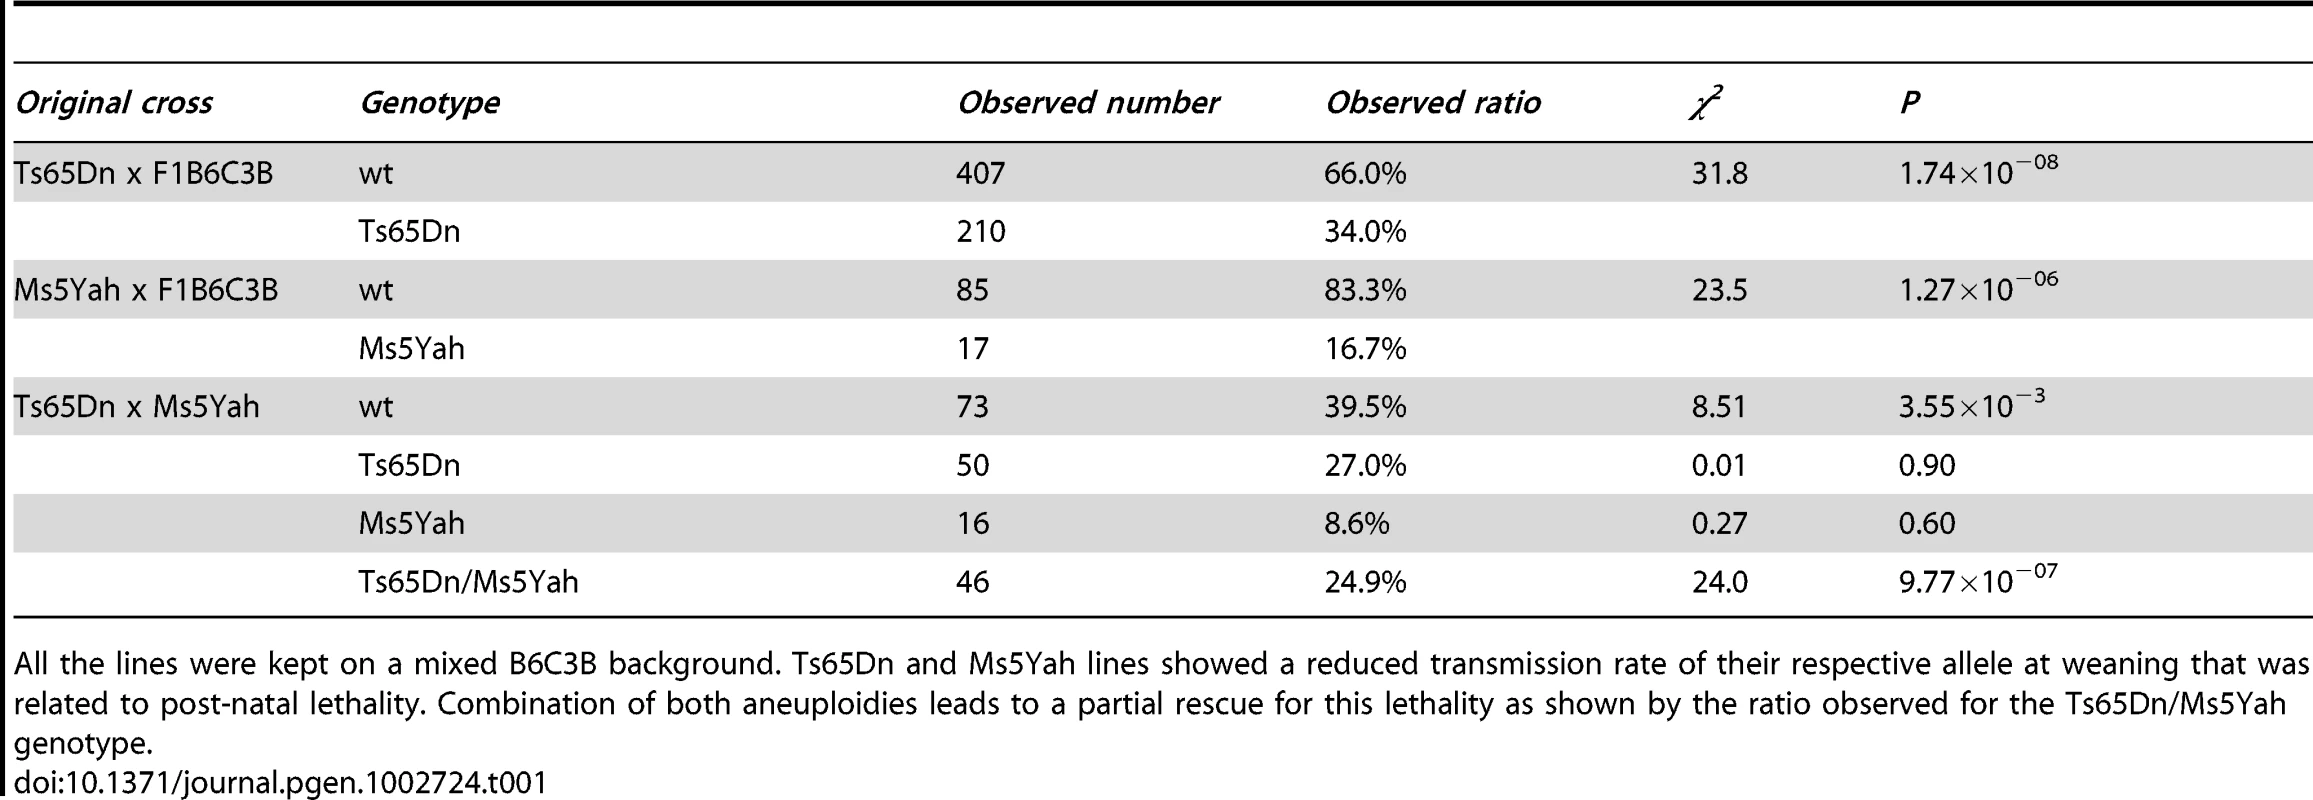 Transmission rates of the Ts65Dn and Ms5Yah alleles observed at weaning in Ts65Dn, Ms5Yah, and Ts65Dn/Ms5Yah mice.